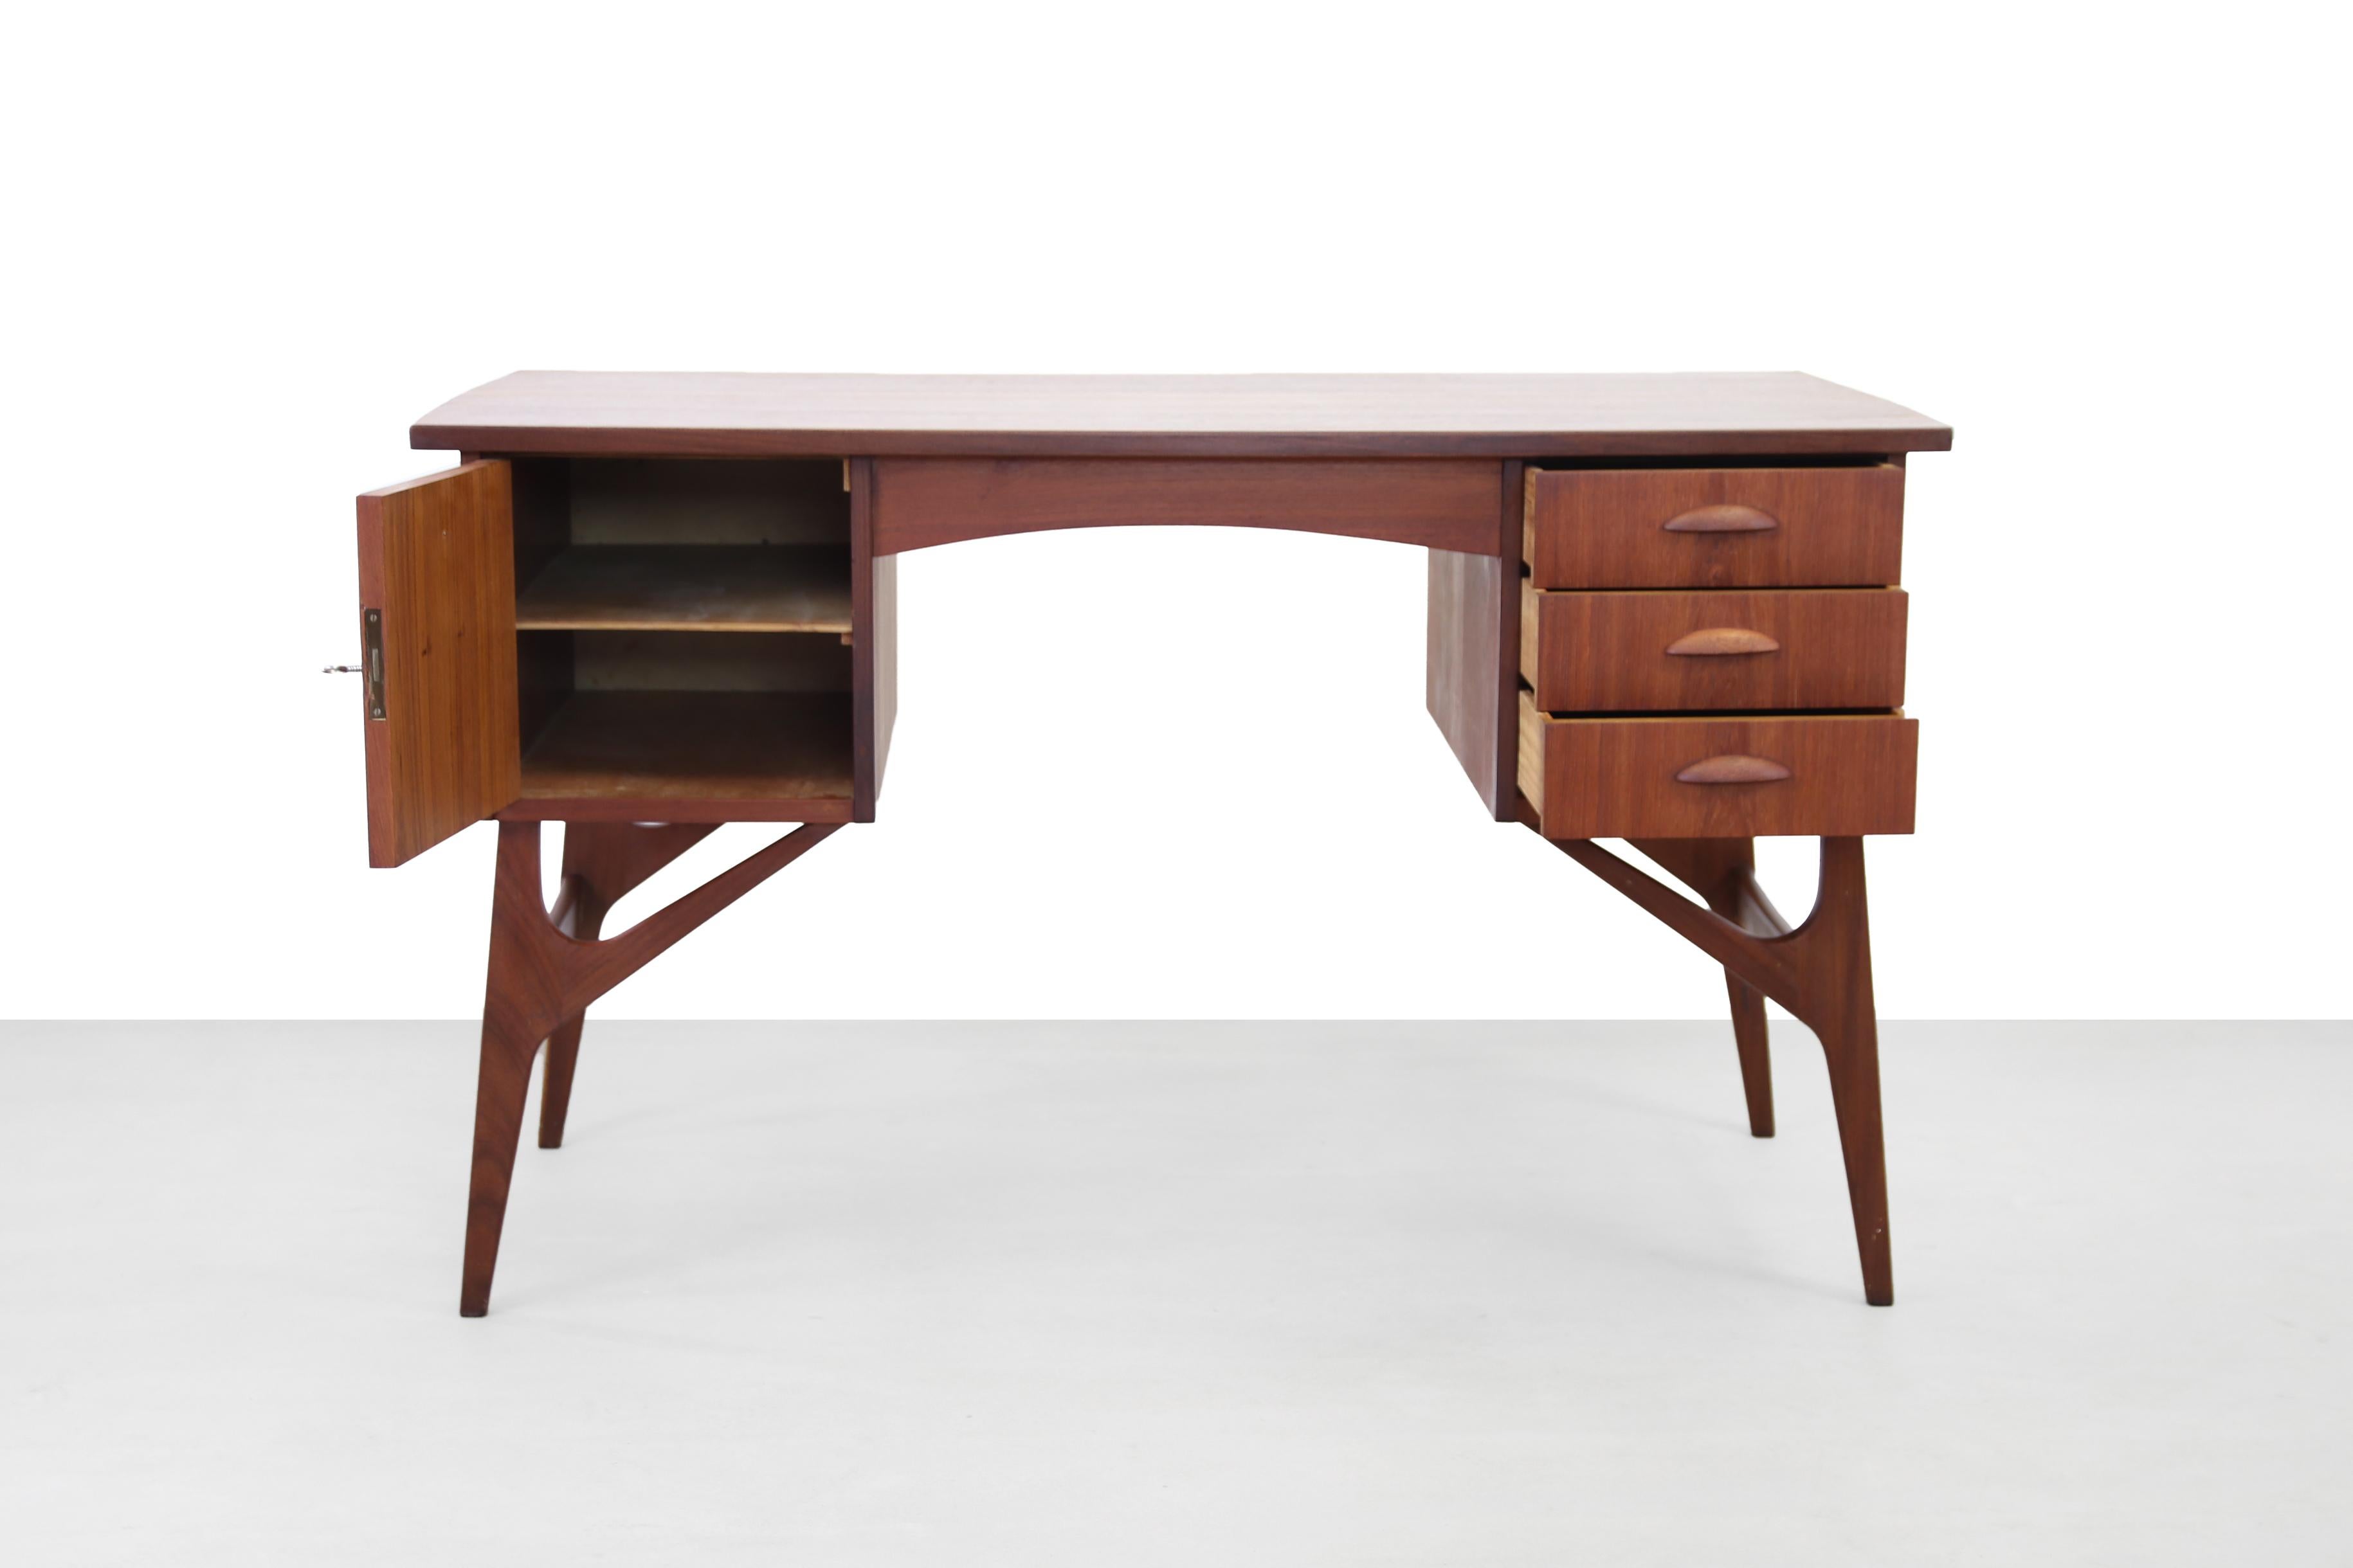 Stylish Danish design desk made of teak wood. Beautifully designed legs, 3 drawers and a storage compartment with a door for sufficient storage space and a teak veneer top with a slight curve on the side. The back of the desk is beautifully